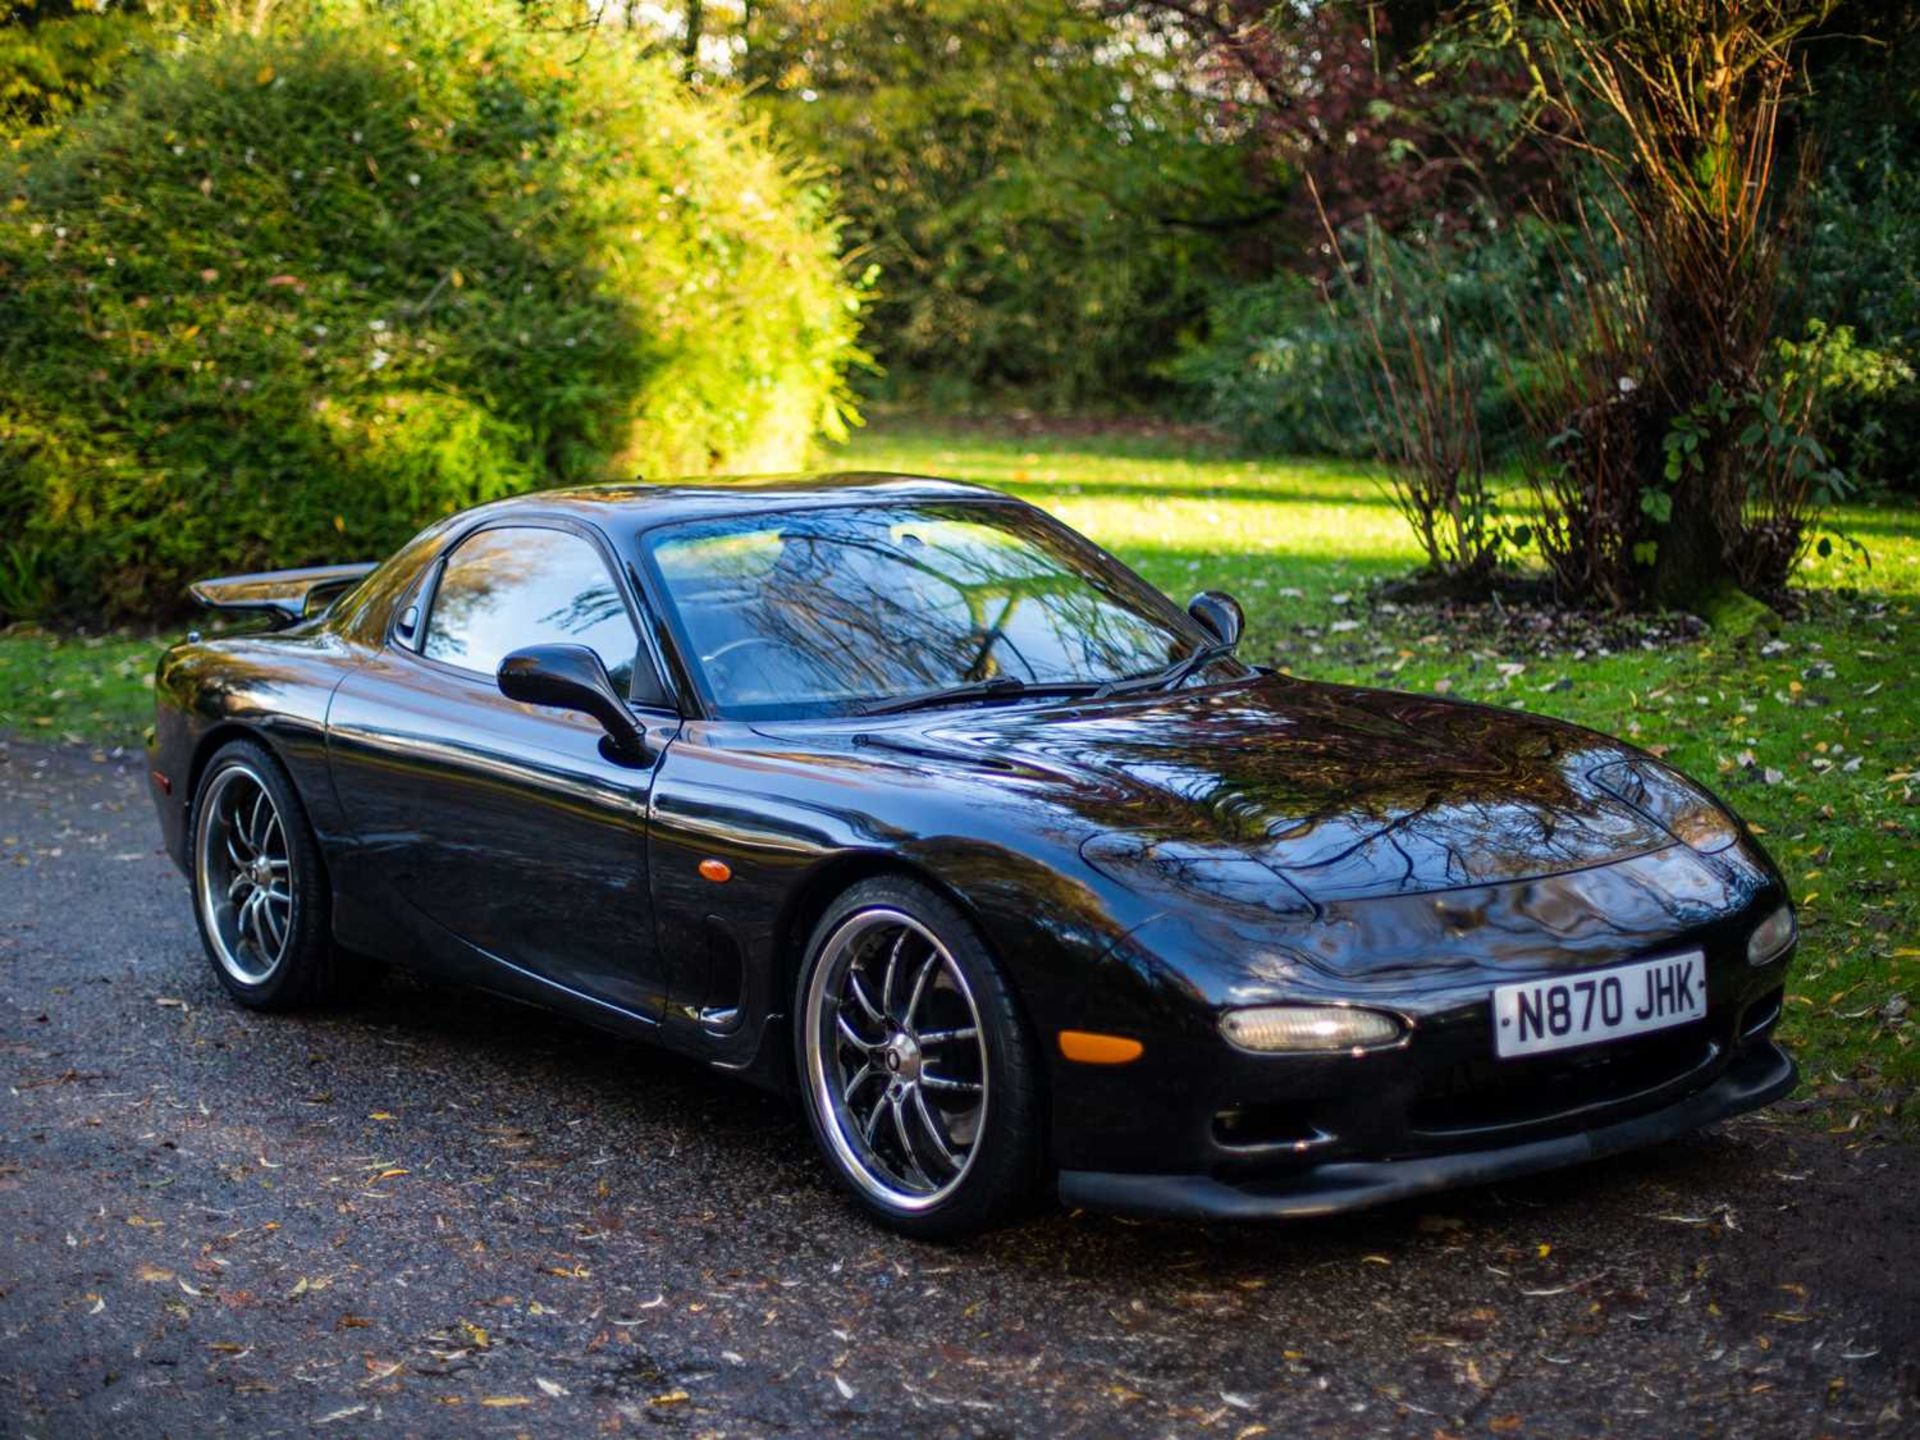 1996 Mazda RX7 FD Efini ***NO RESERVE*** UK registered since 2006 and powered by a highly modified (